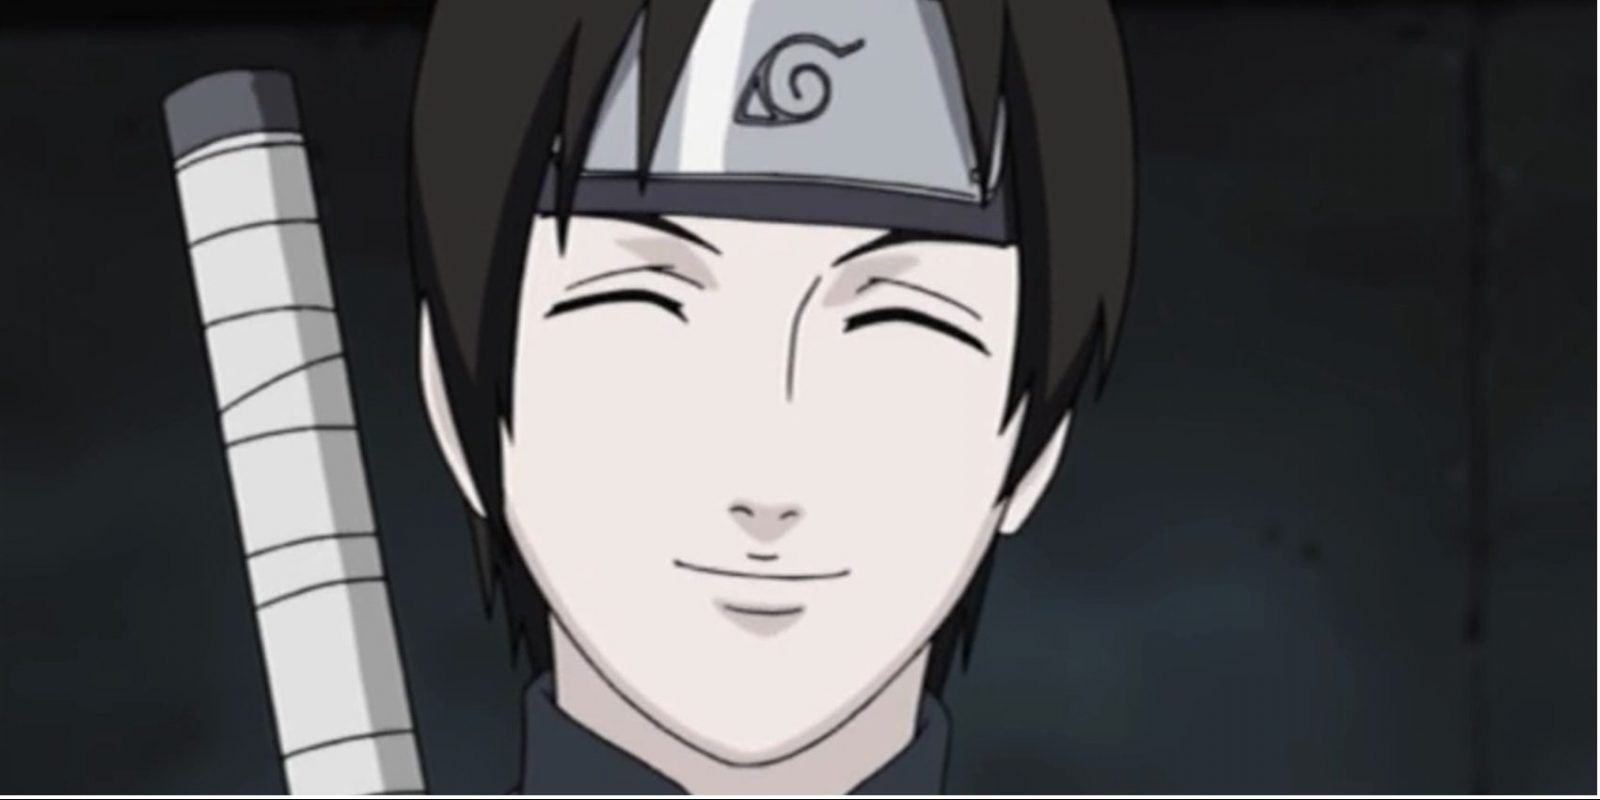 Sai smiles with his eyes closed